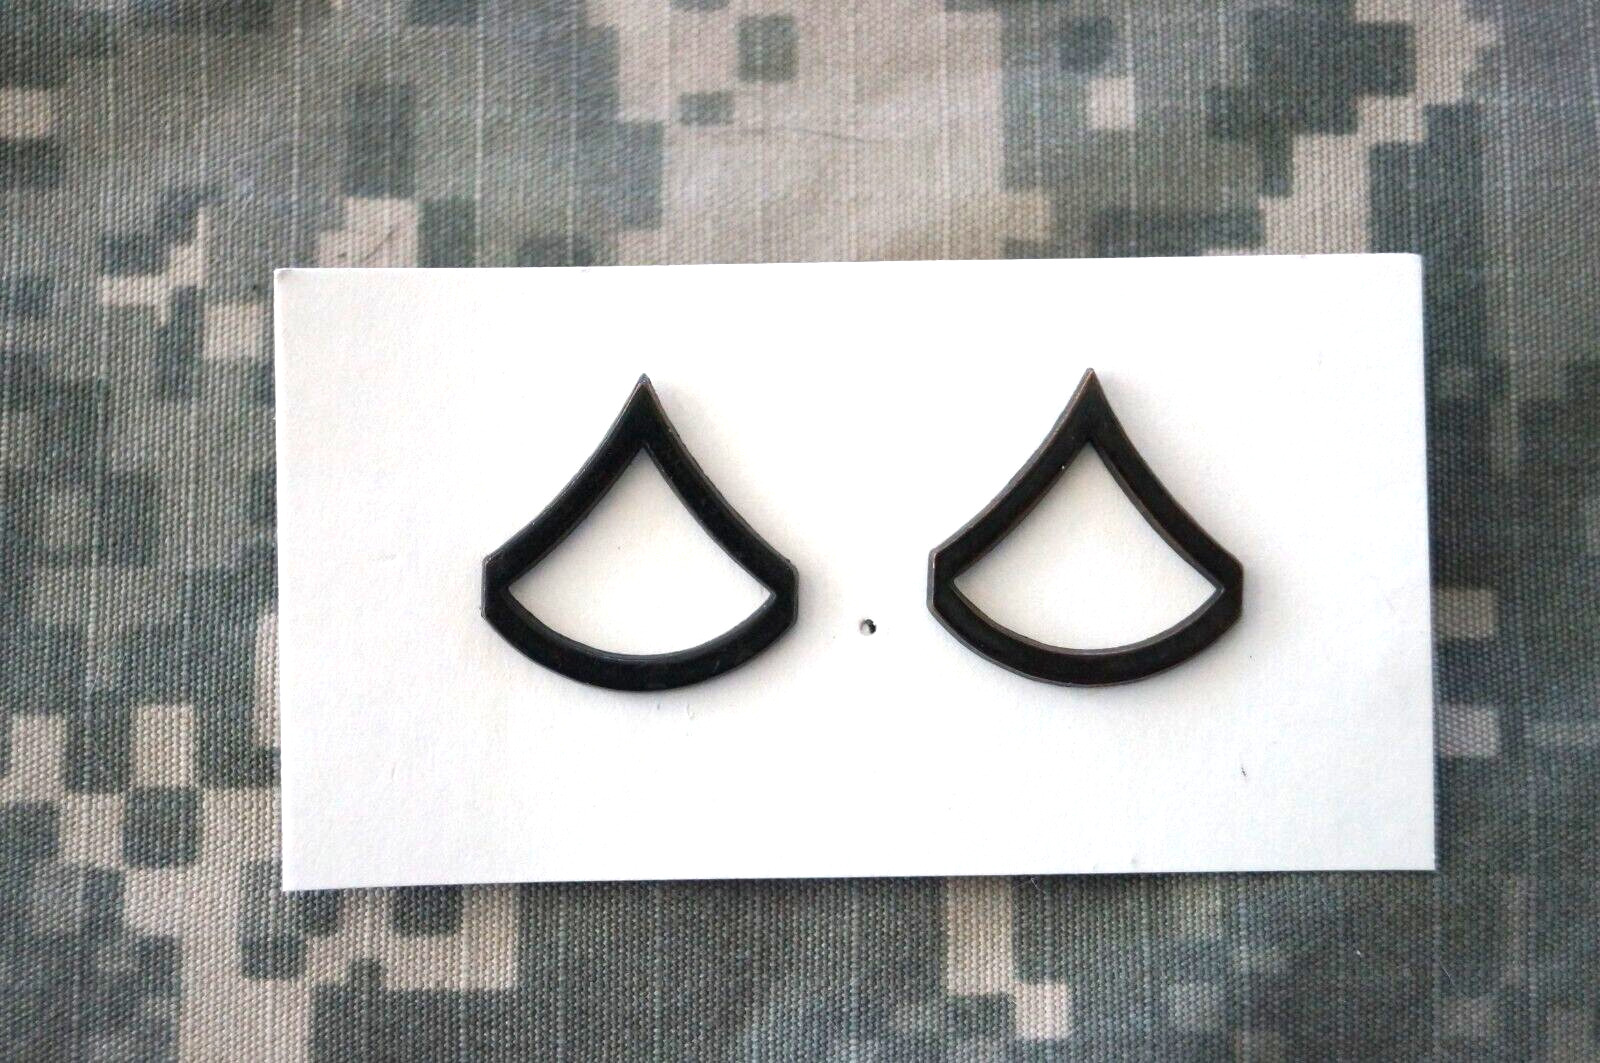 US Army Private First Class PFC/E-3 Rank Insignia Set Subdued Metal Authentic